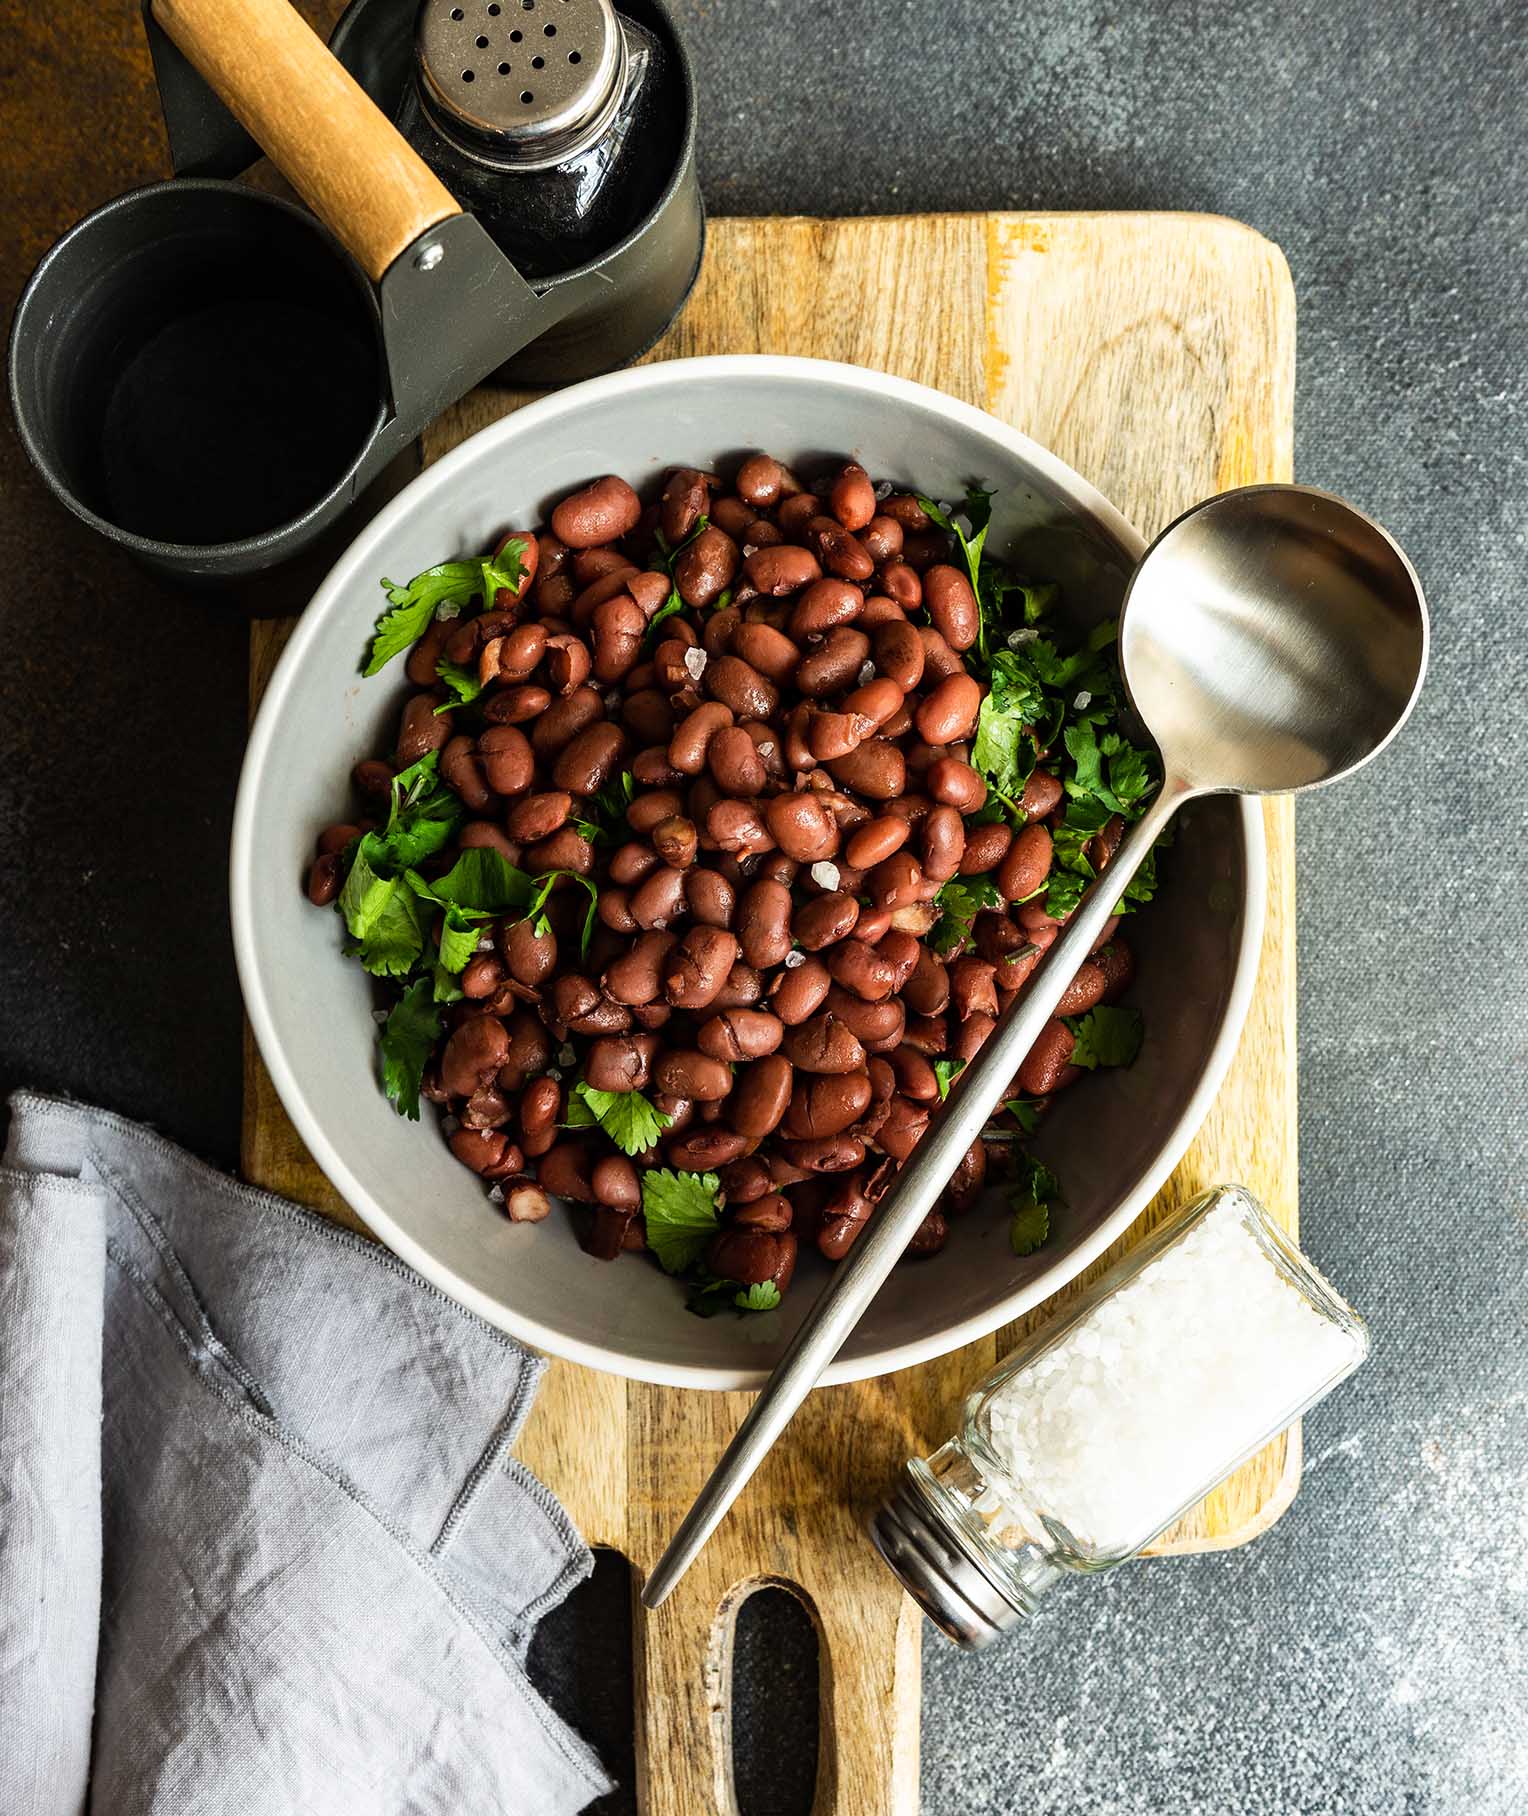 Simple Tips for Enjoying and Cooking Adzuki Beans